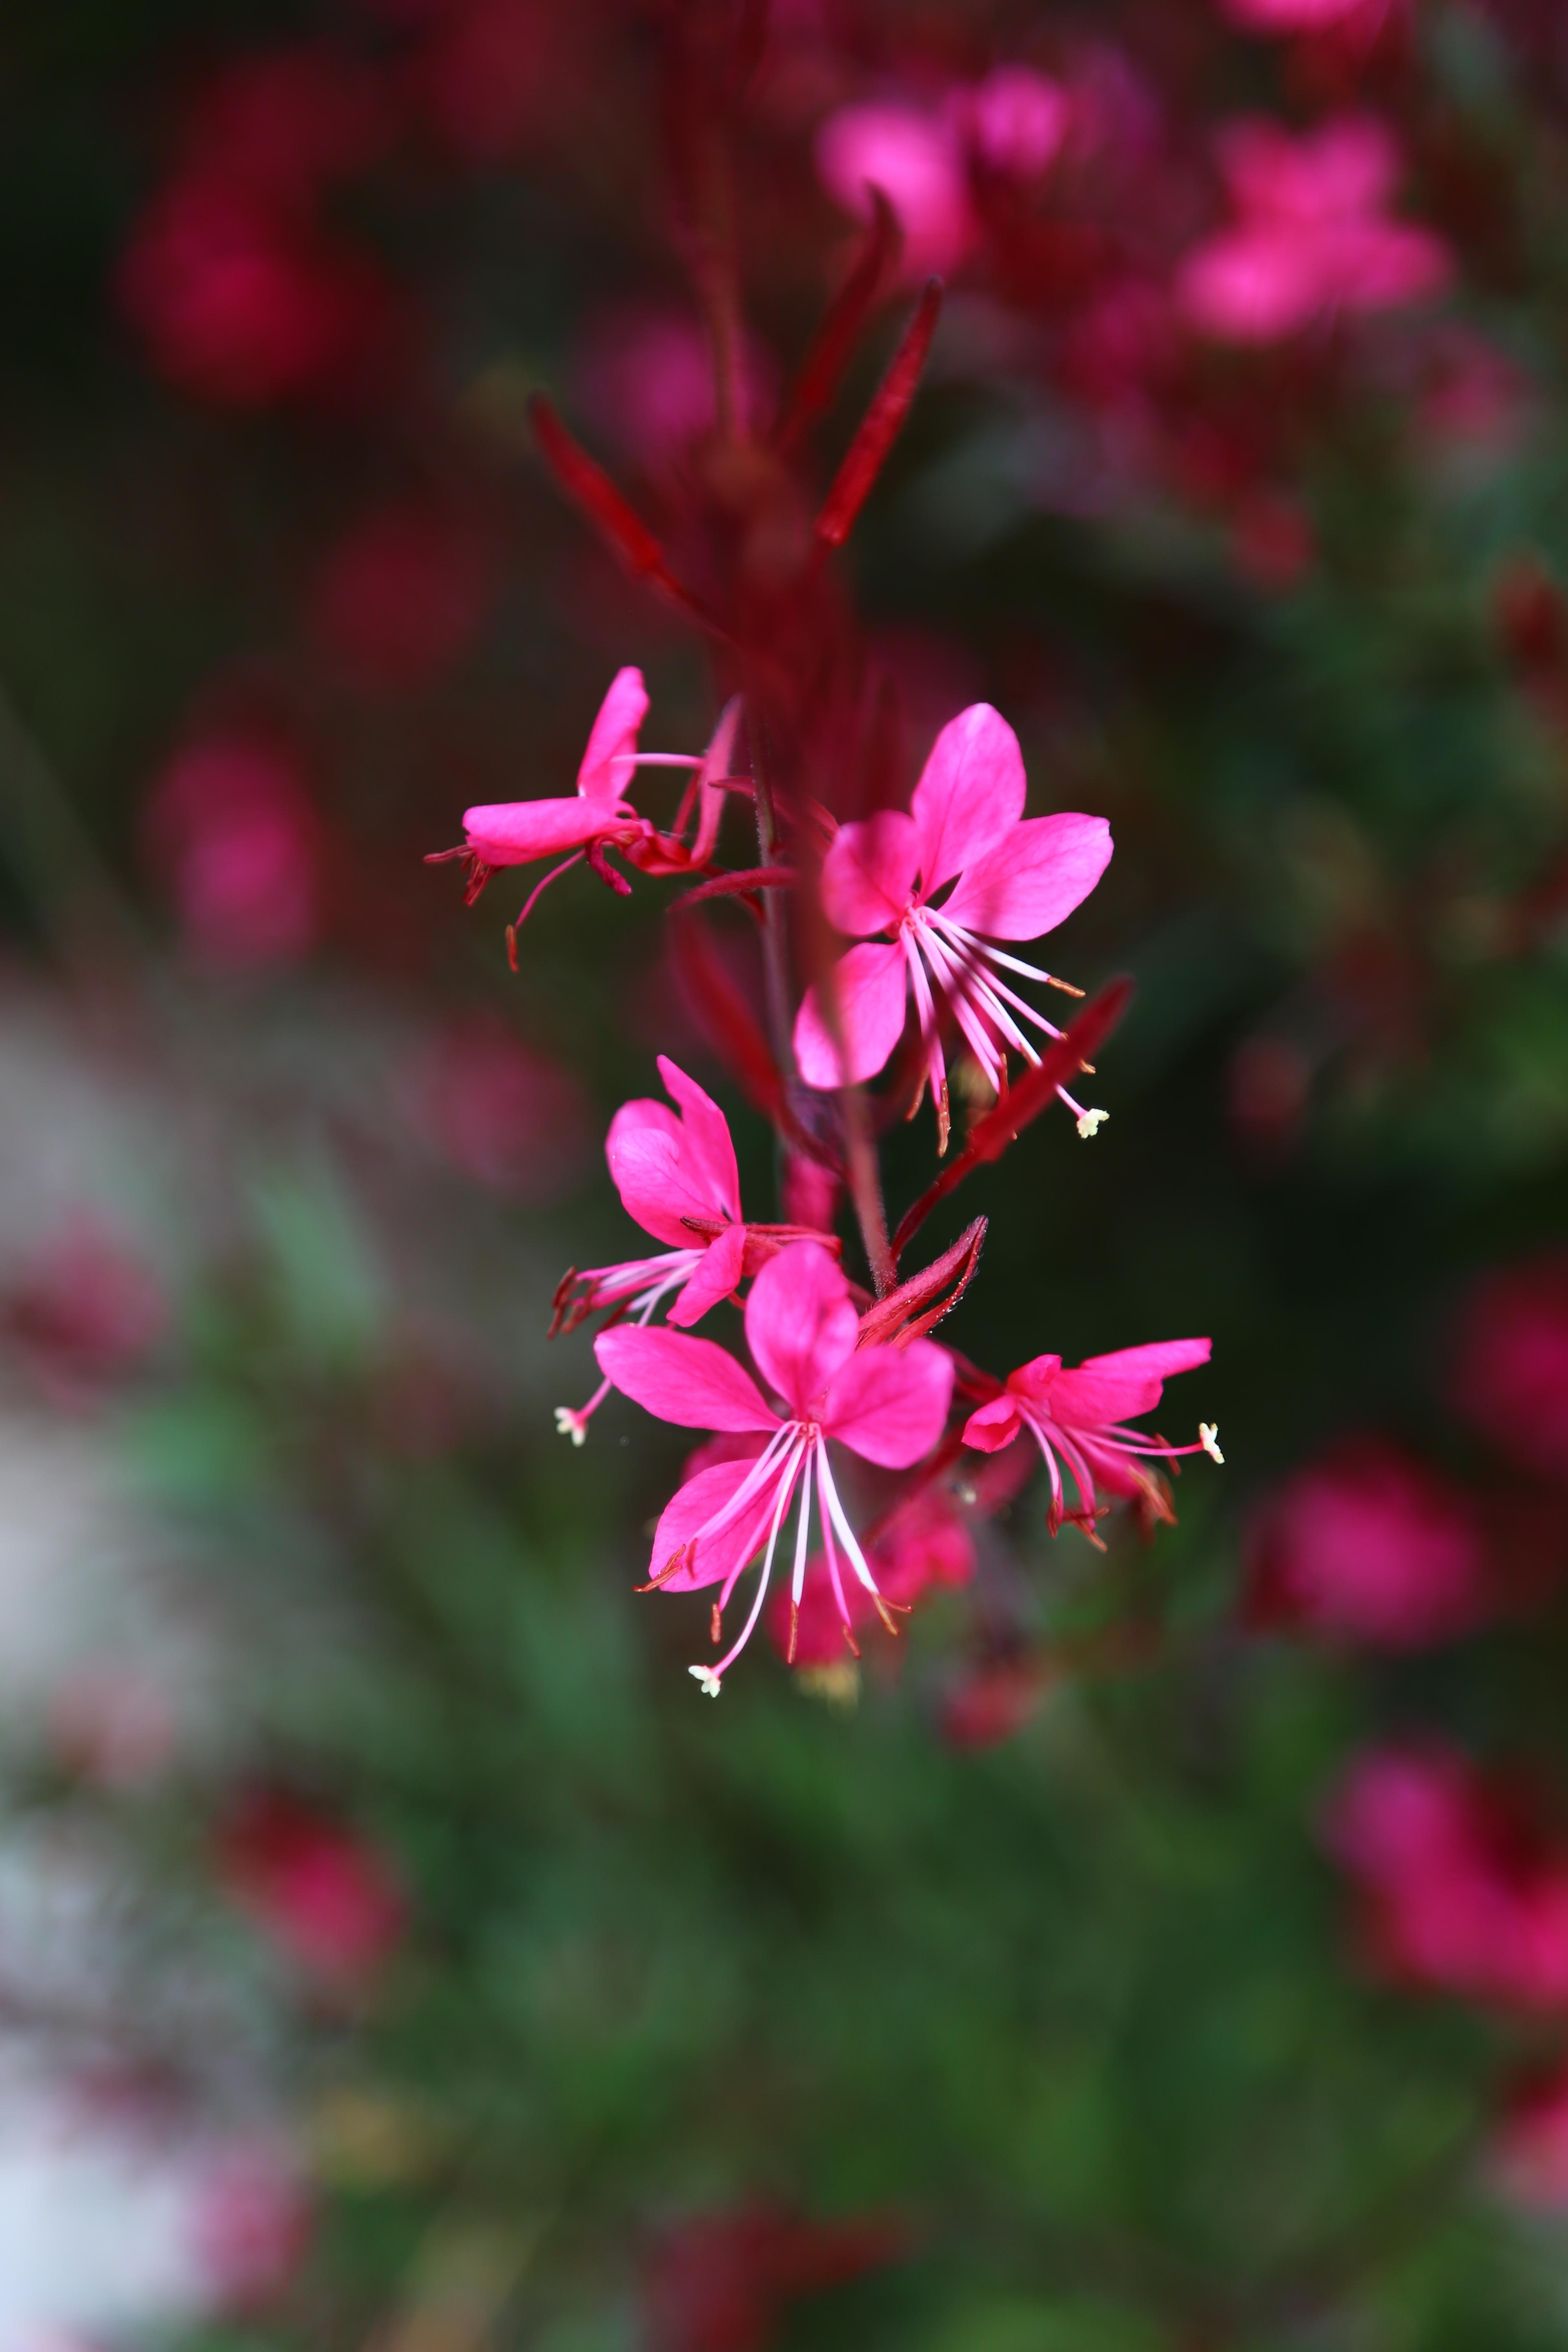 pink flowers with white filaments, red anthers, red buds and stems
